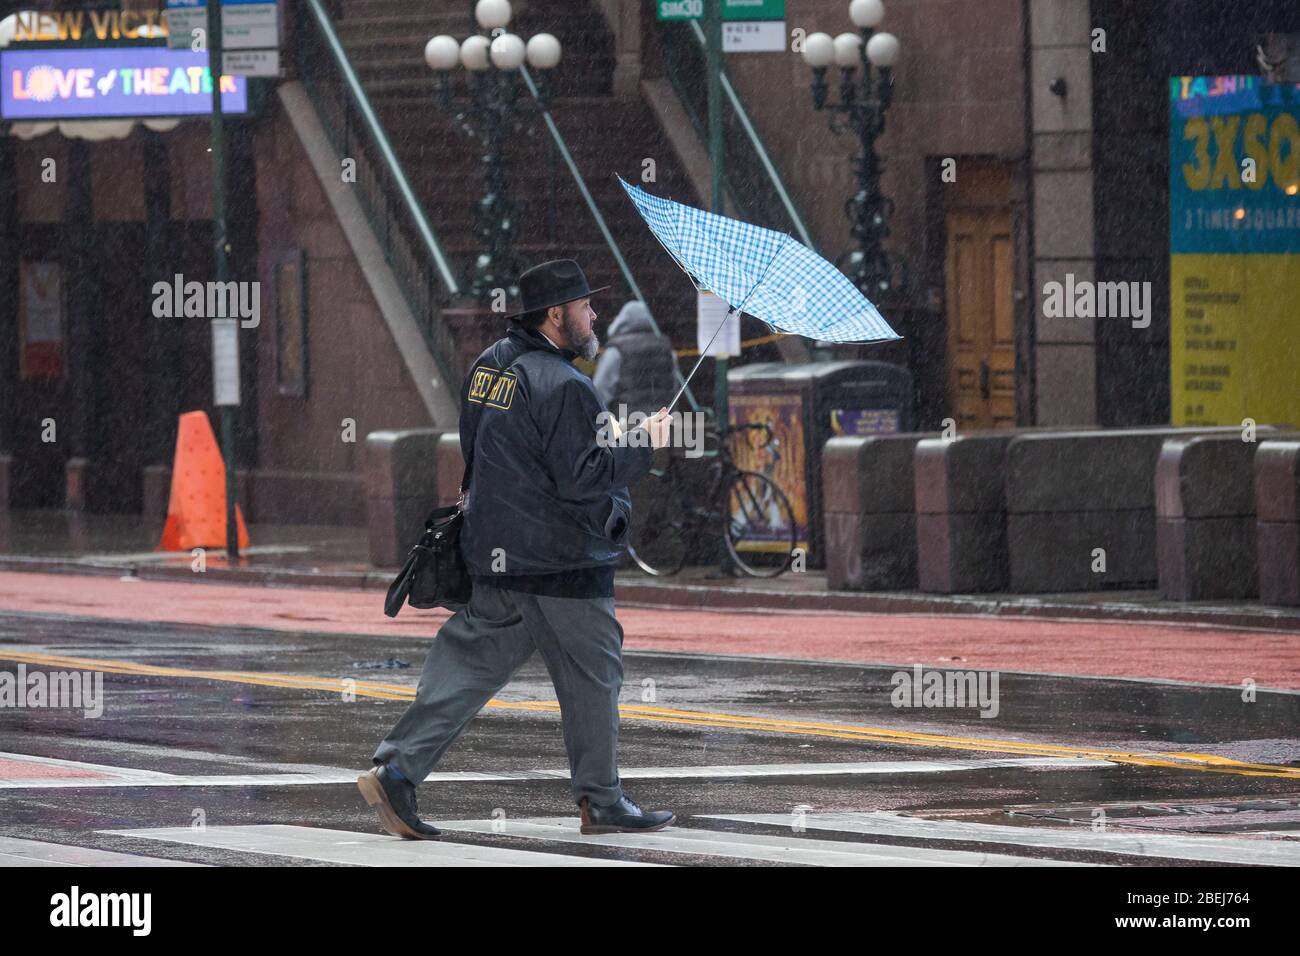 New York, USA. 13th Apr, 2020. A pedestrian carrying an umbrella walks against the wind at the Times Square neighborhood in New York, the United States, April 13, 2020. Strong wind and rain hit New York on Monday. Credit: Michael Nagle/Xinhua/Alamy Live News Stock Photo